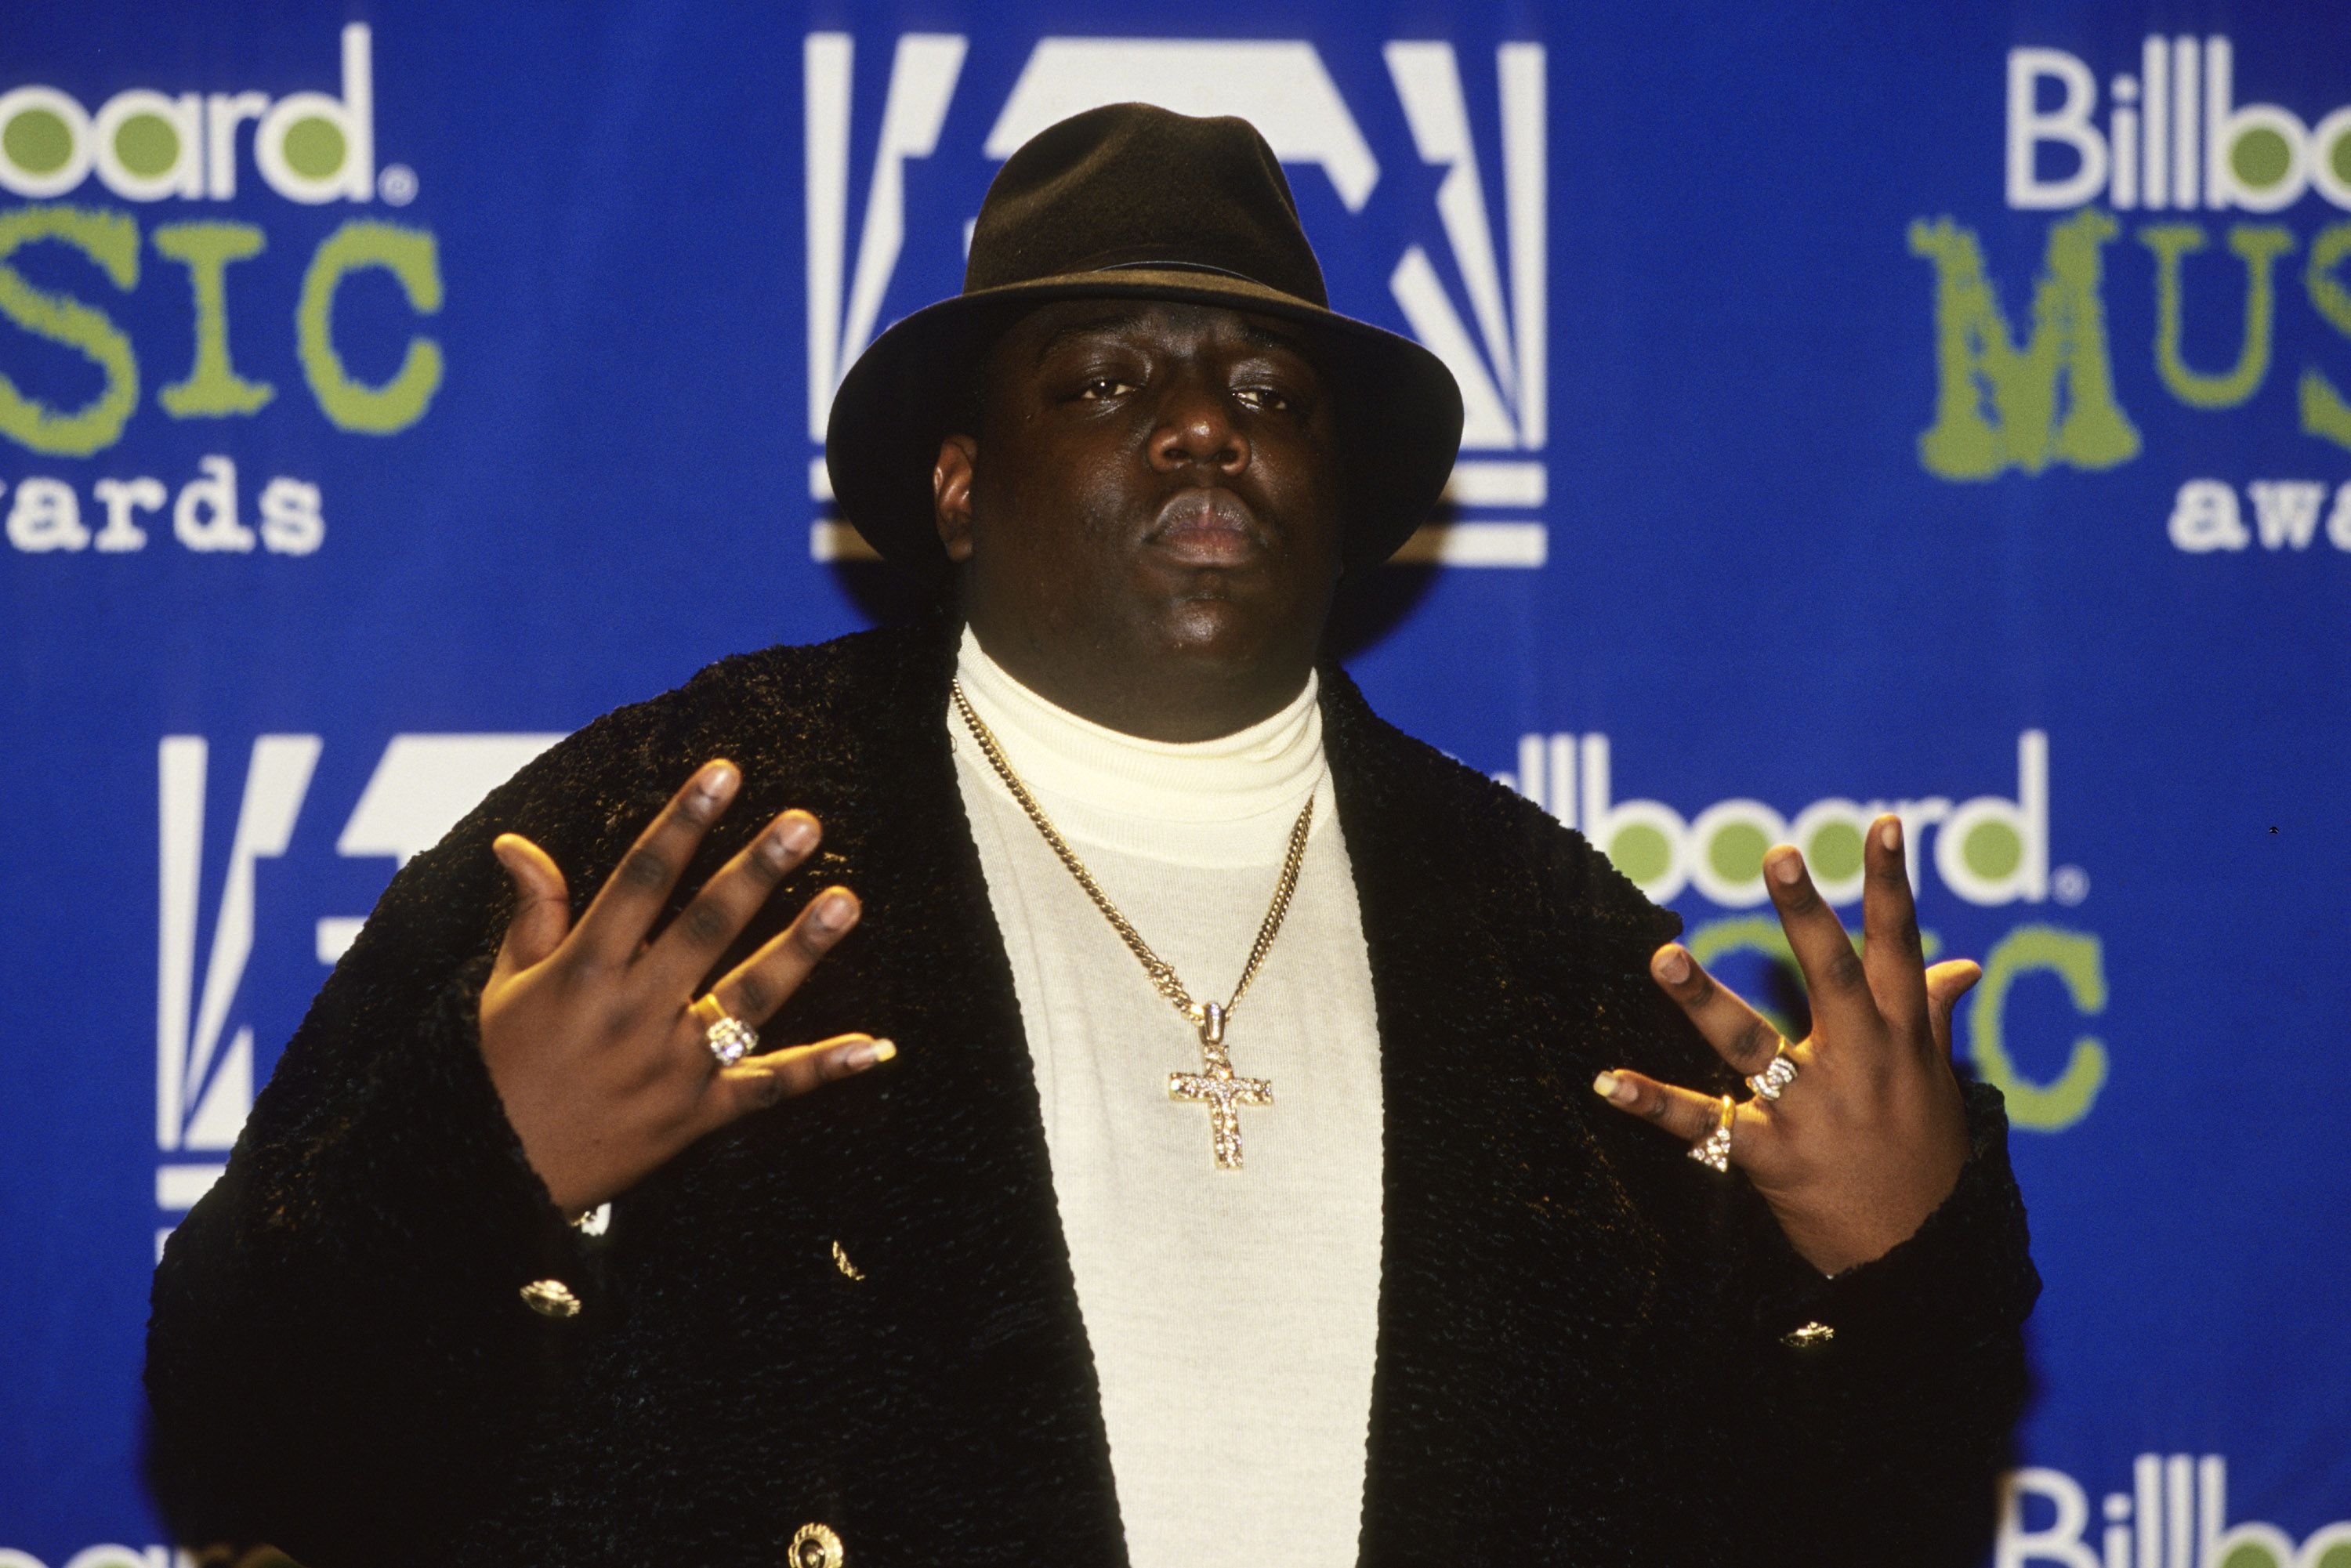 Notorious B.I.G. at the 1995 Billboard Music Awards in New York on December 6, 1996 | Photo: Getty Images